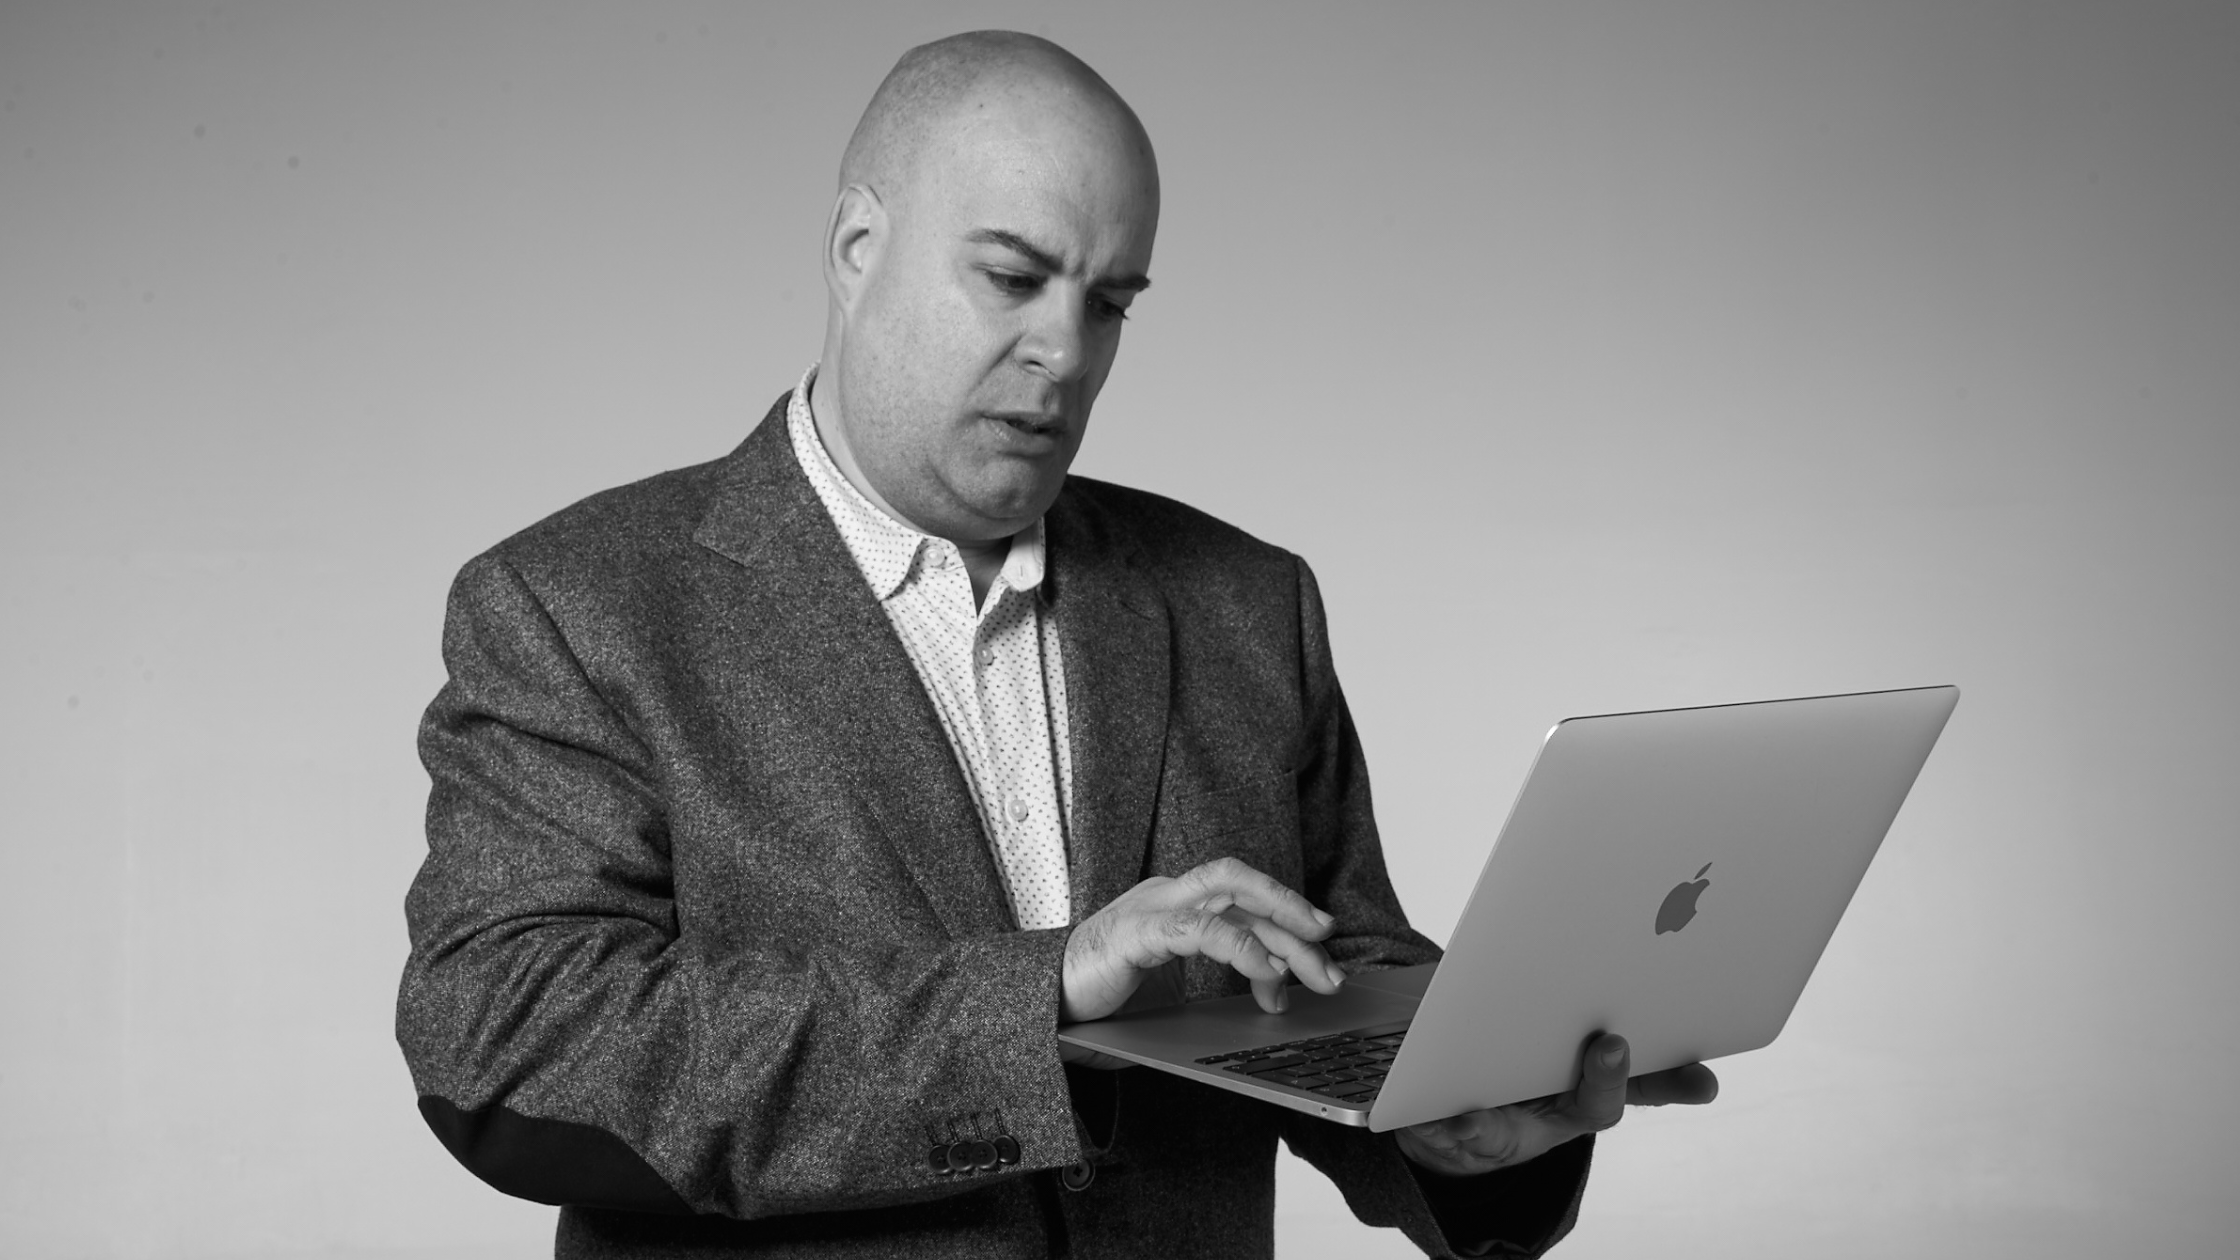 Man in a suit looking intently at an open Apple laptop.